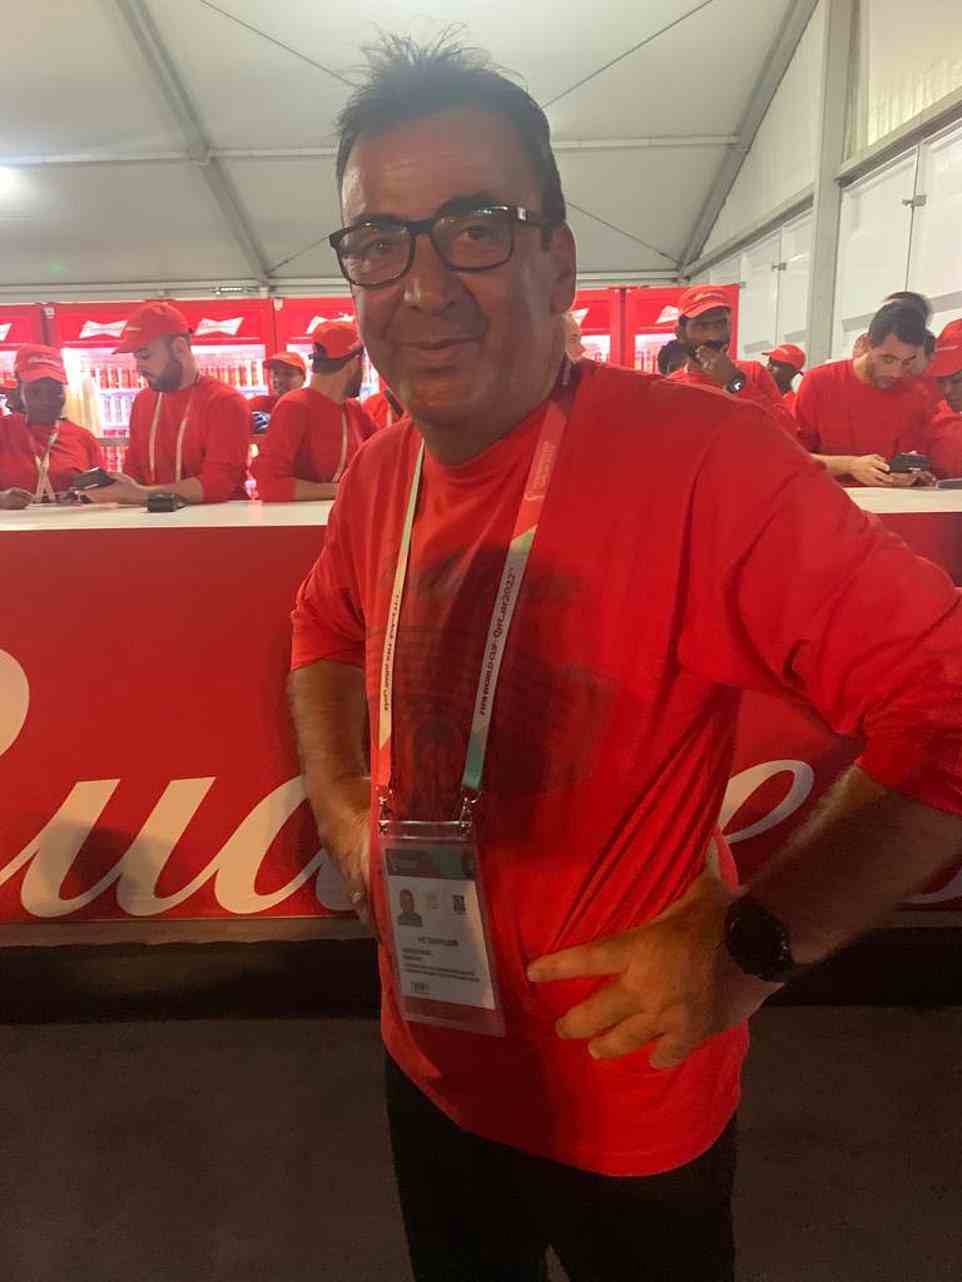 Nektatios Kassotakis (pictured), manager of the area serving alcohol within the fan zone told MailOnline that 48,000 cans of Budweiser had been stocked in fridges for the opening night and that another 500,000 were in stock